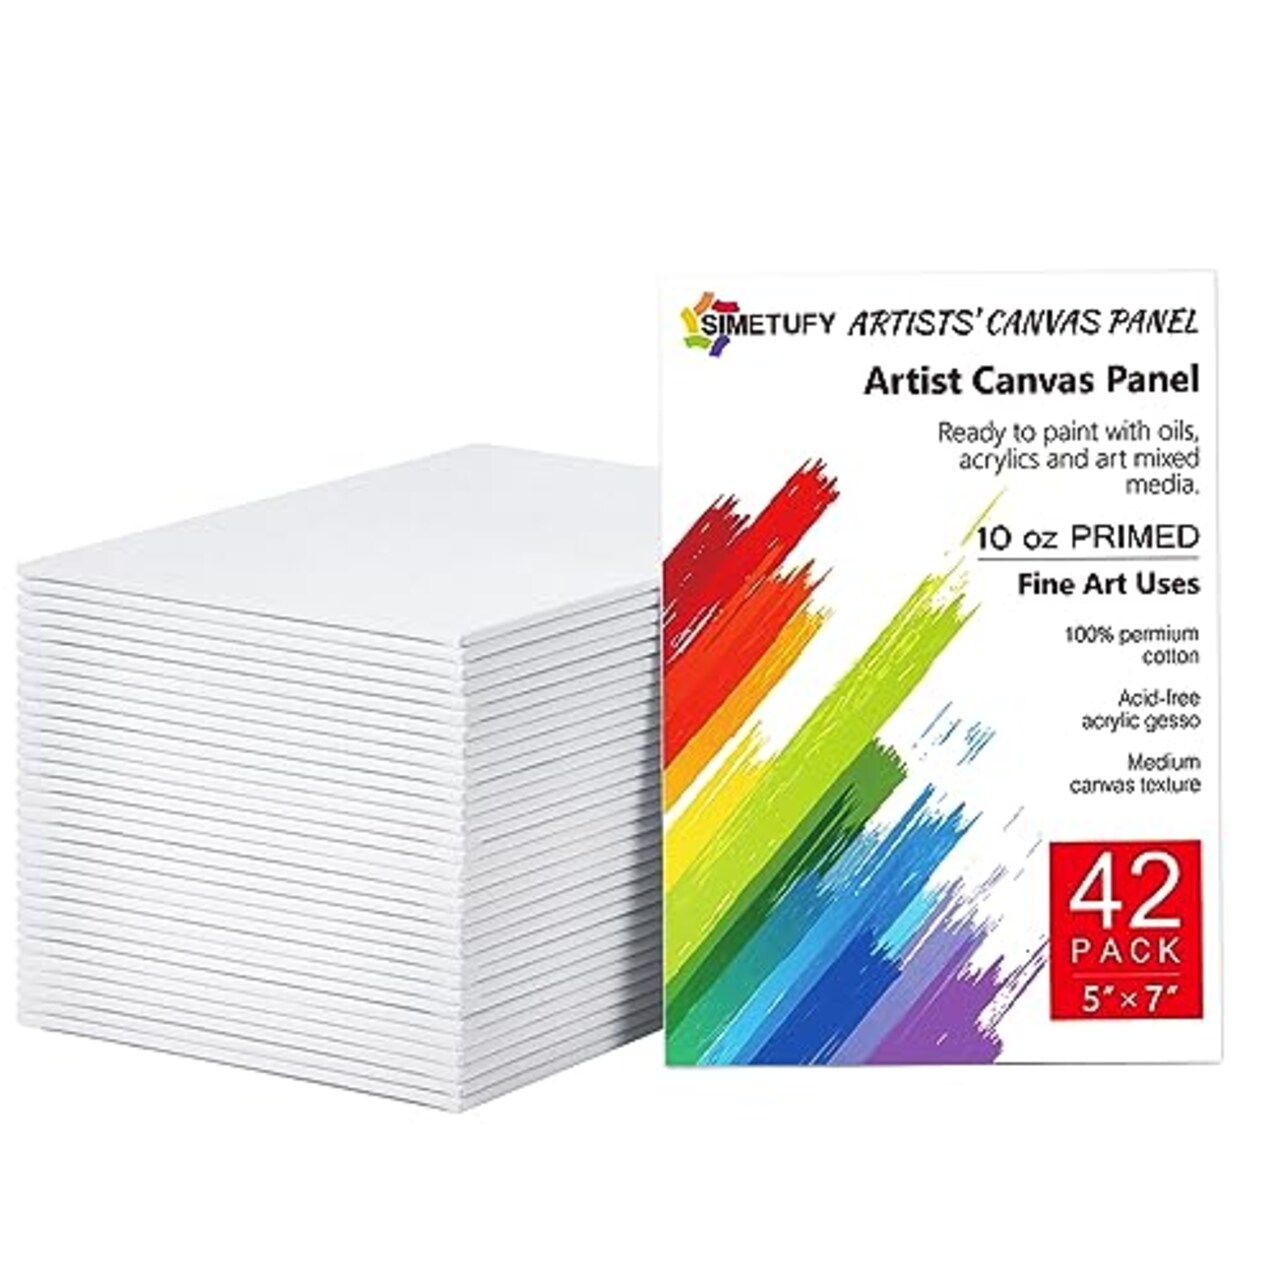 42 Pack 5x7 Inch Canvases for Painting,10 oz Double Primed Acid-Free 100%  Cotton Canvas Panels,Blank Flat Canvas Board for Acrylics Oil Watercolor  Paints